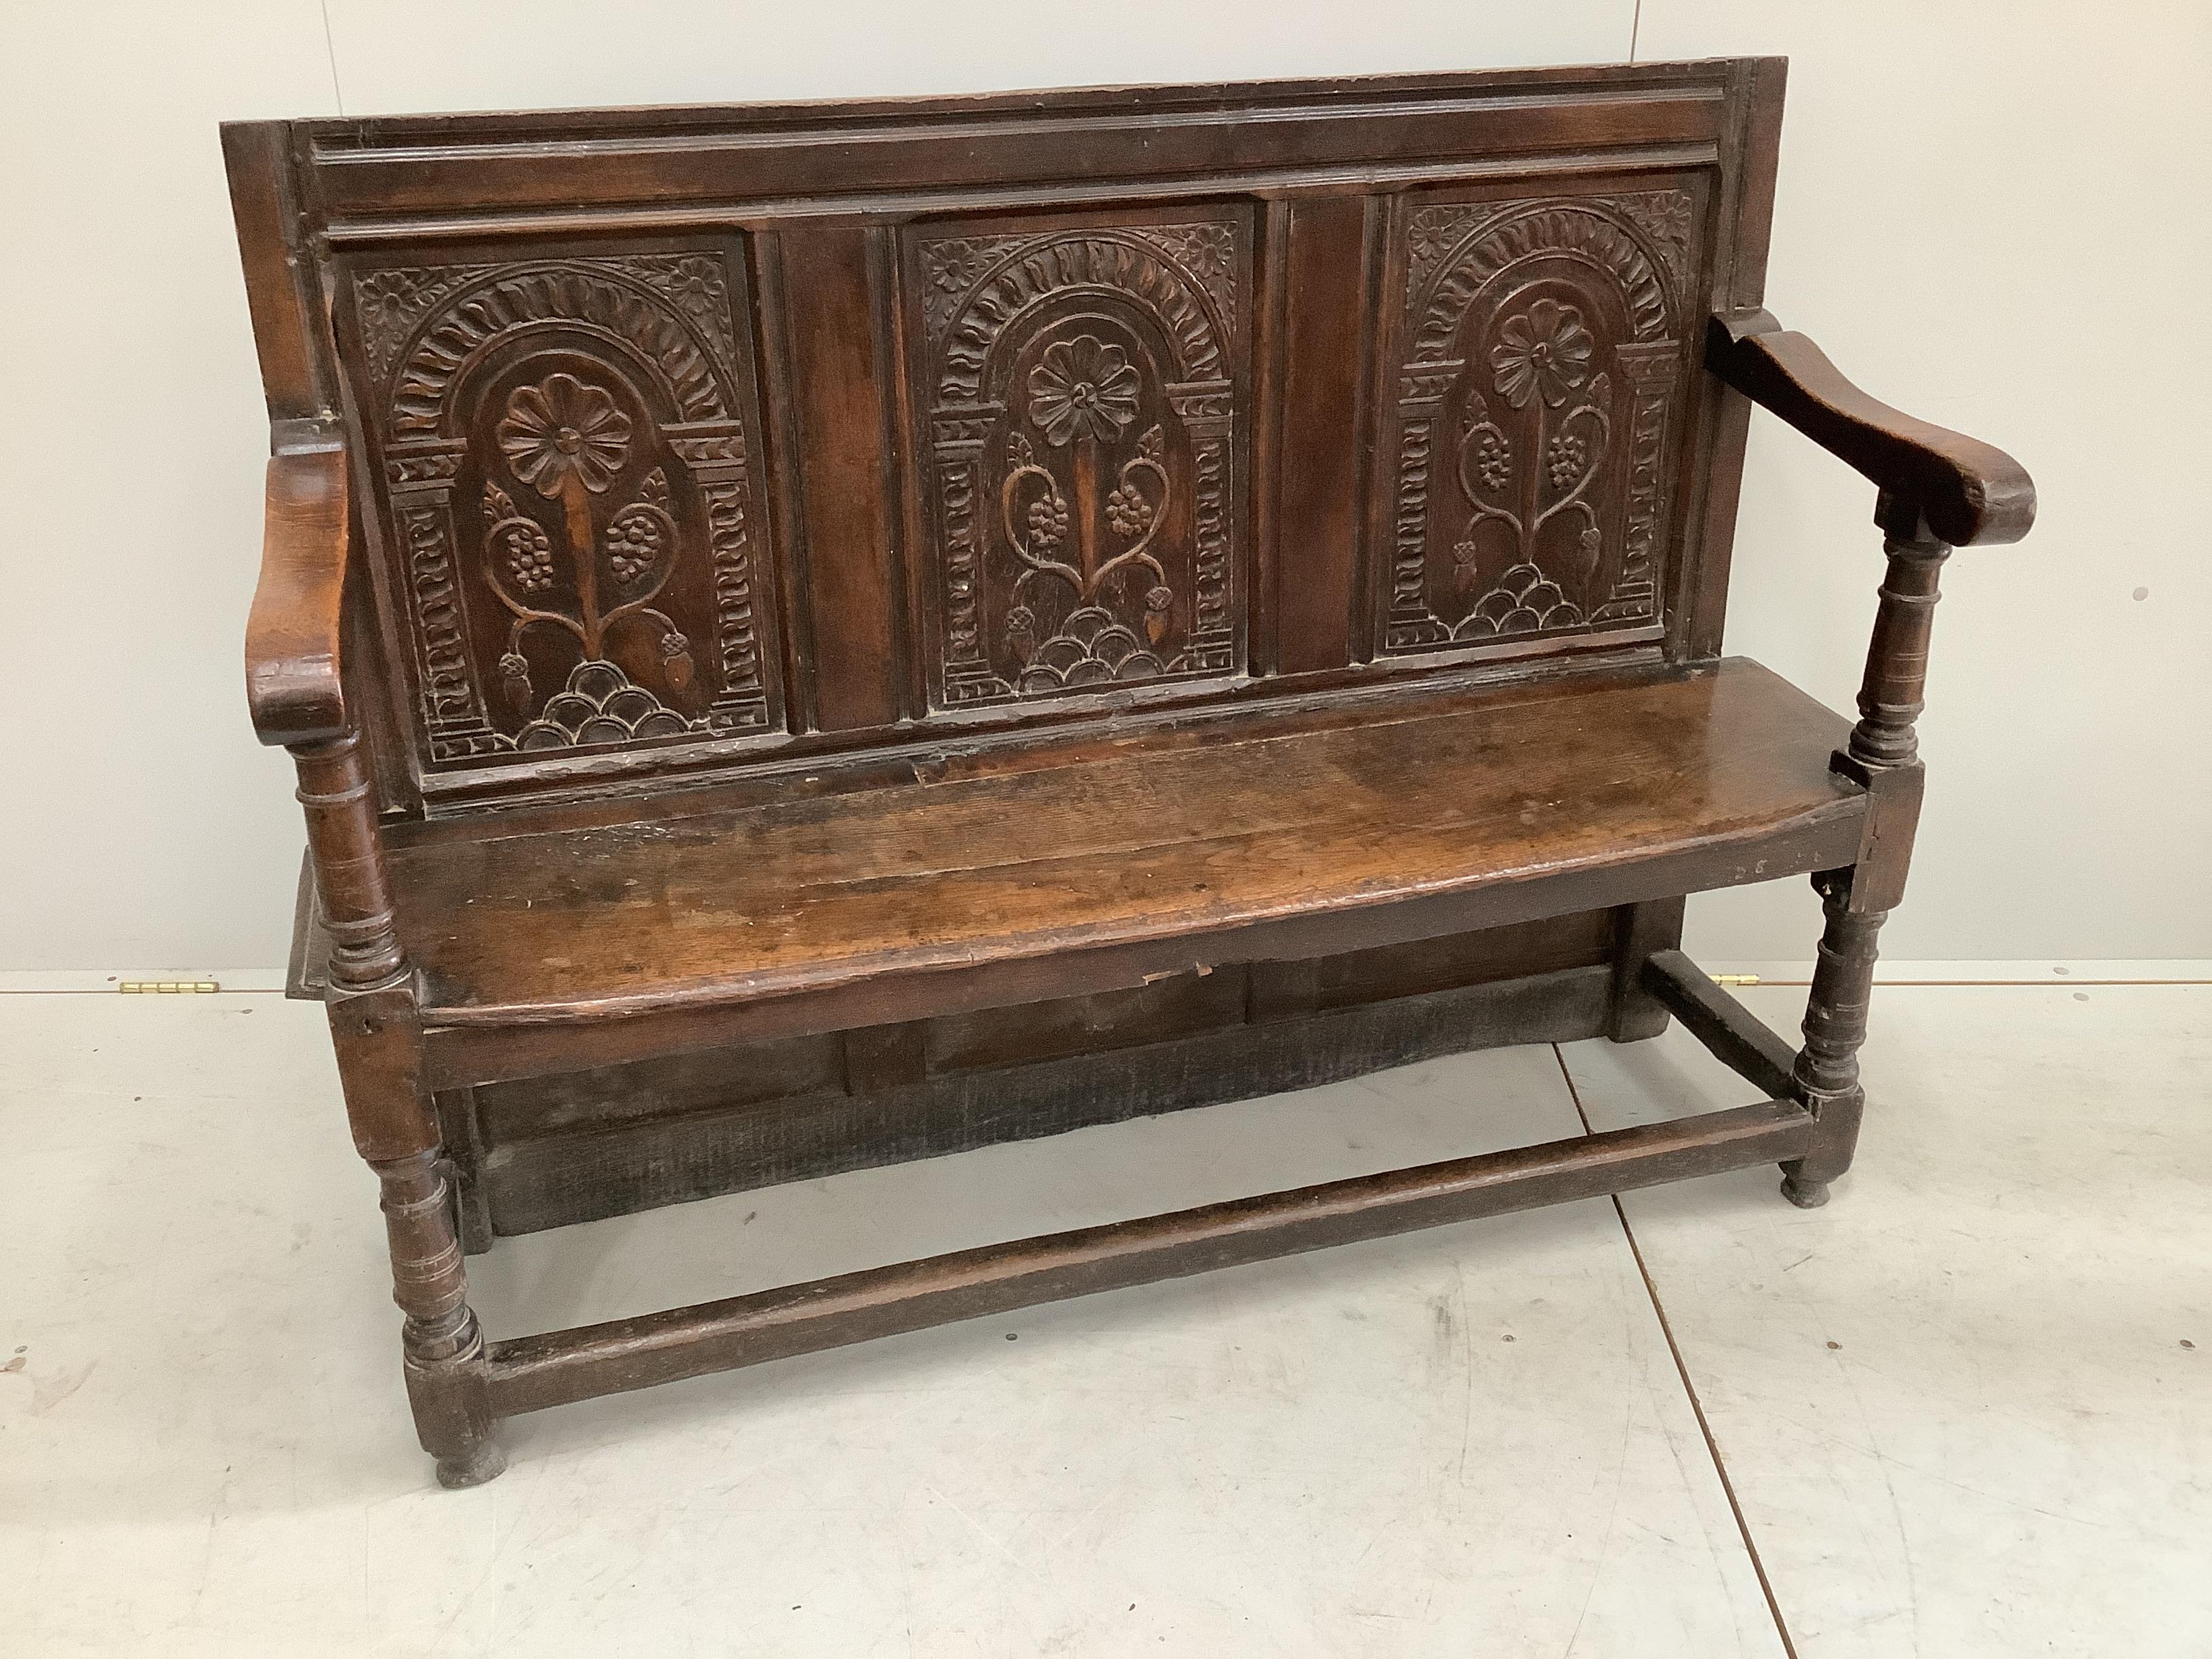 An 18th century style oak settle, incorporates old timber, width 130cm, depth 44cm, height 99cm